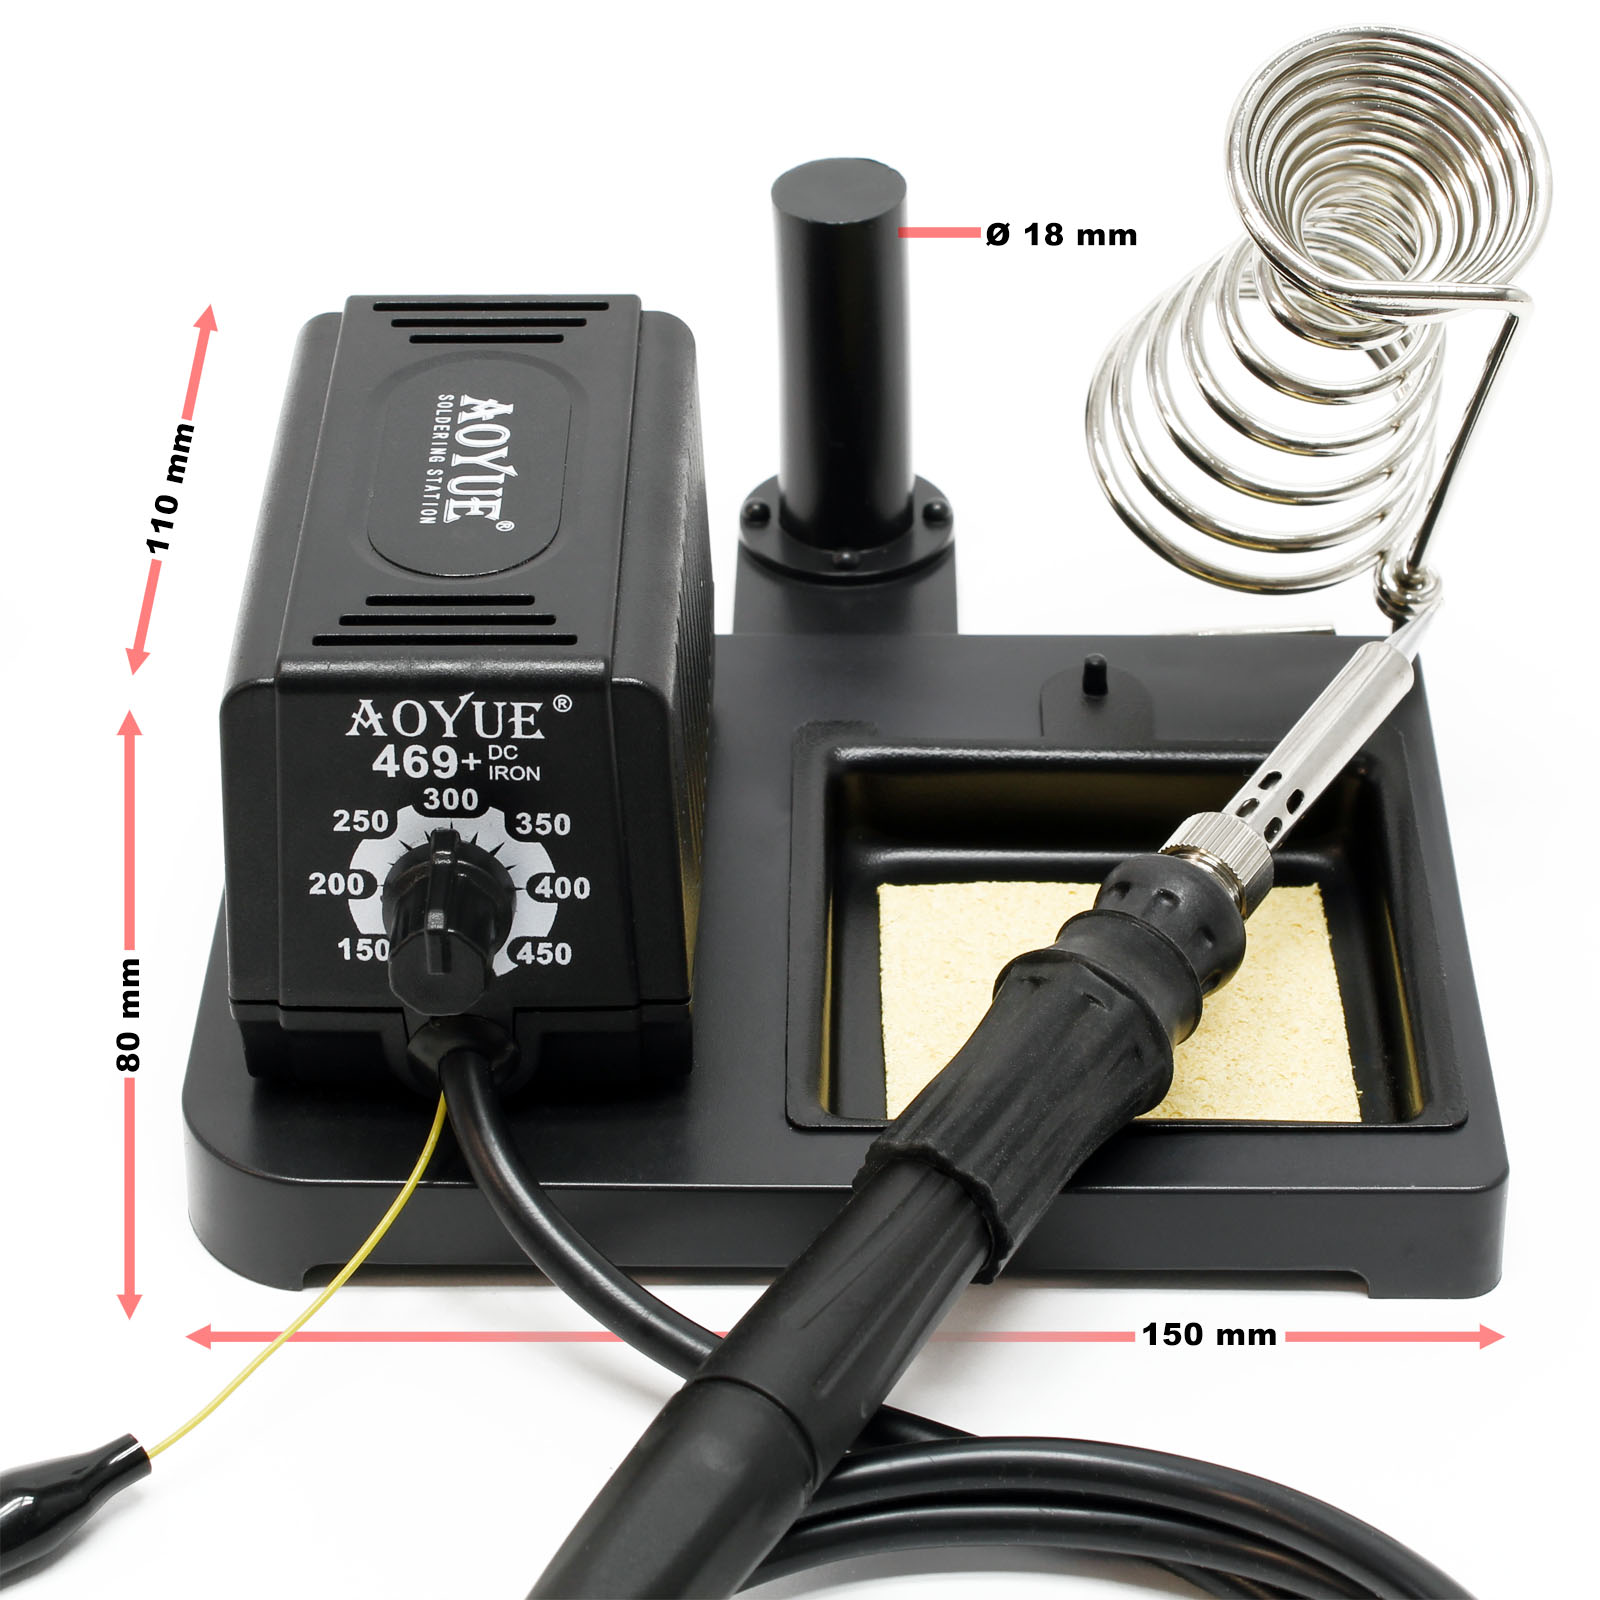 AOYUE 469 Solder station soldering irons ceramic heater 35 W portable